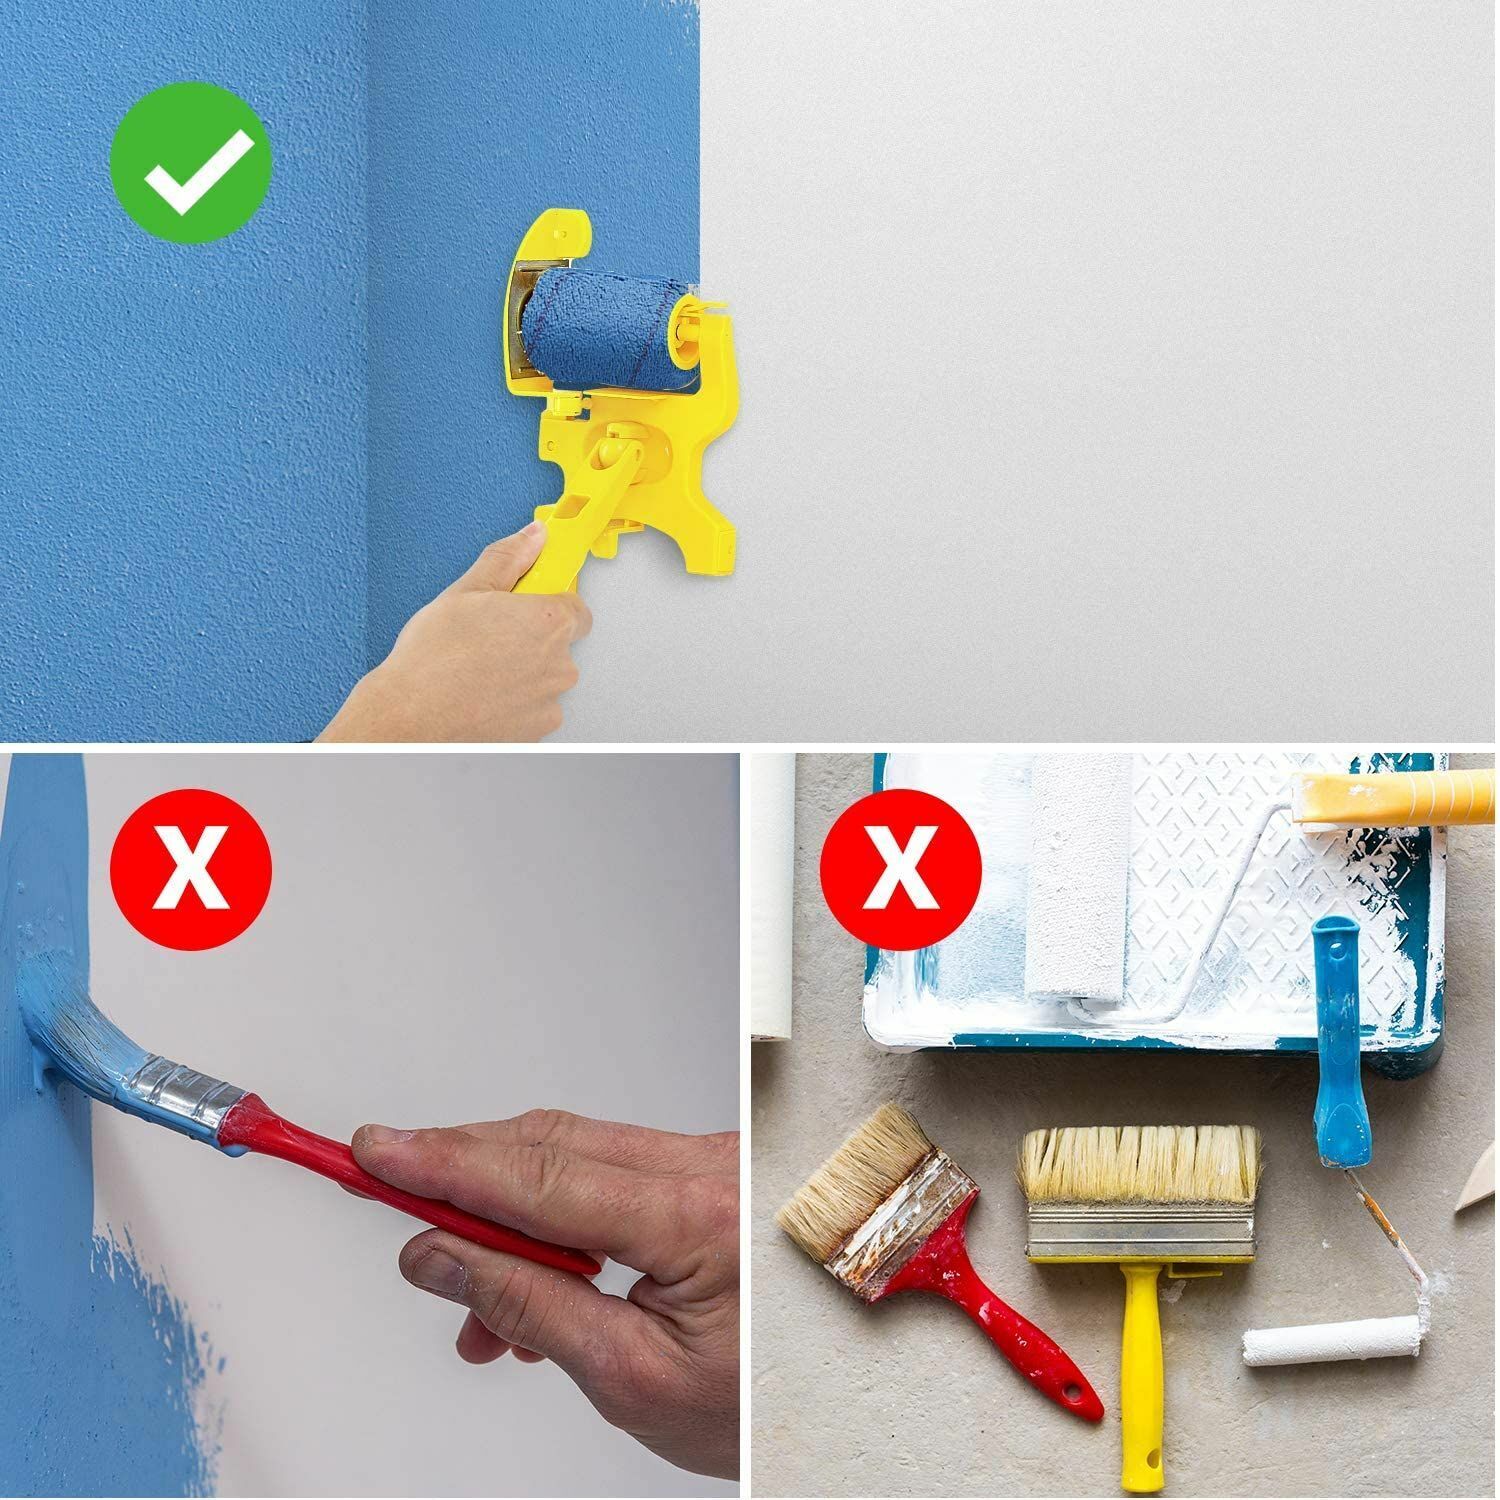 5pcs Handheld Clean-Cut Paint Roller Brush Portable Edger Painting Home Wall Ceilings